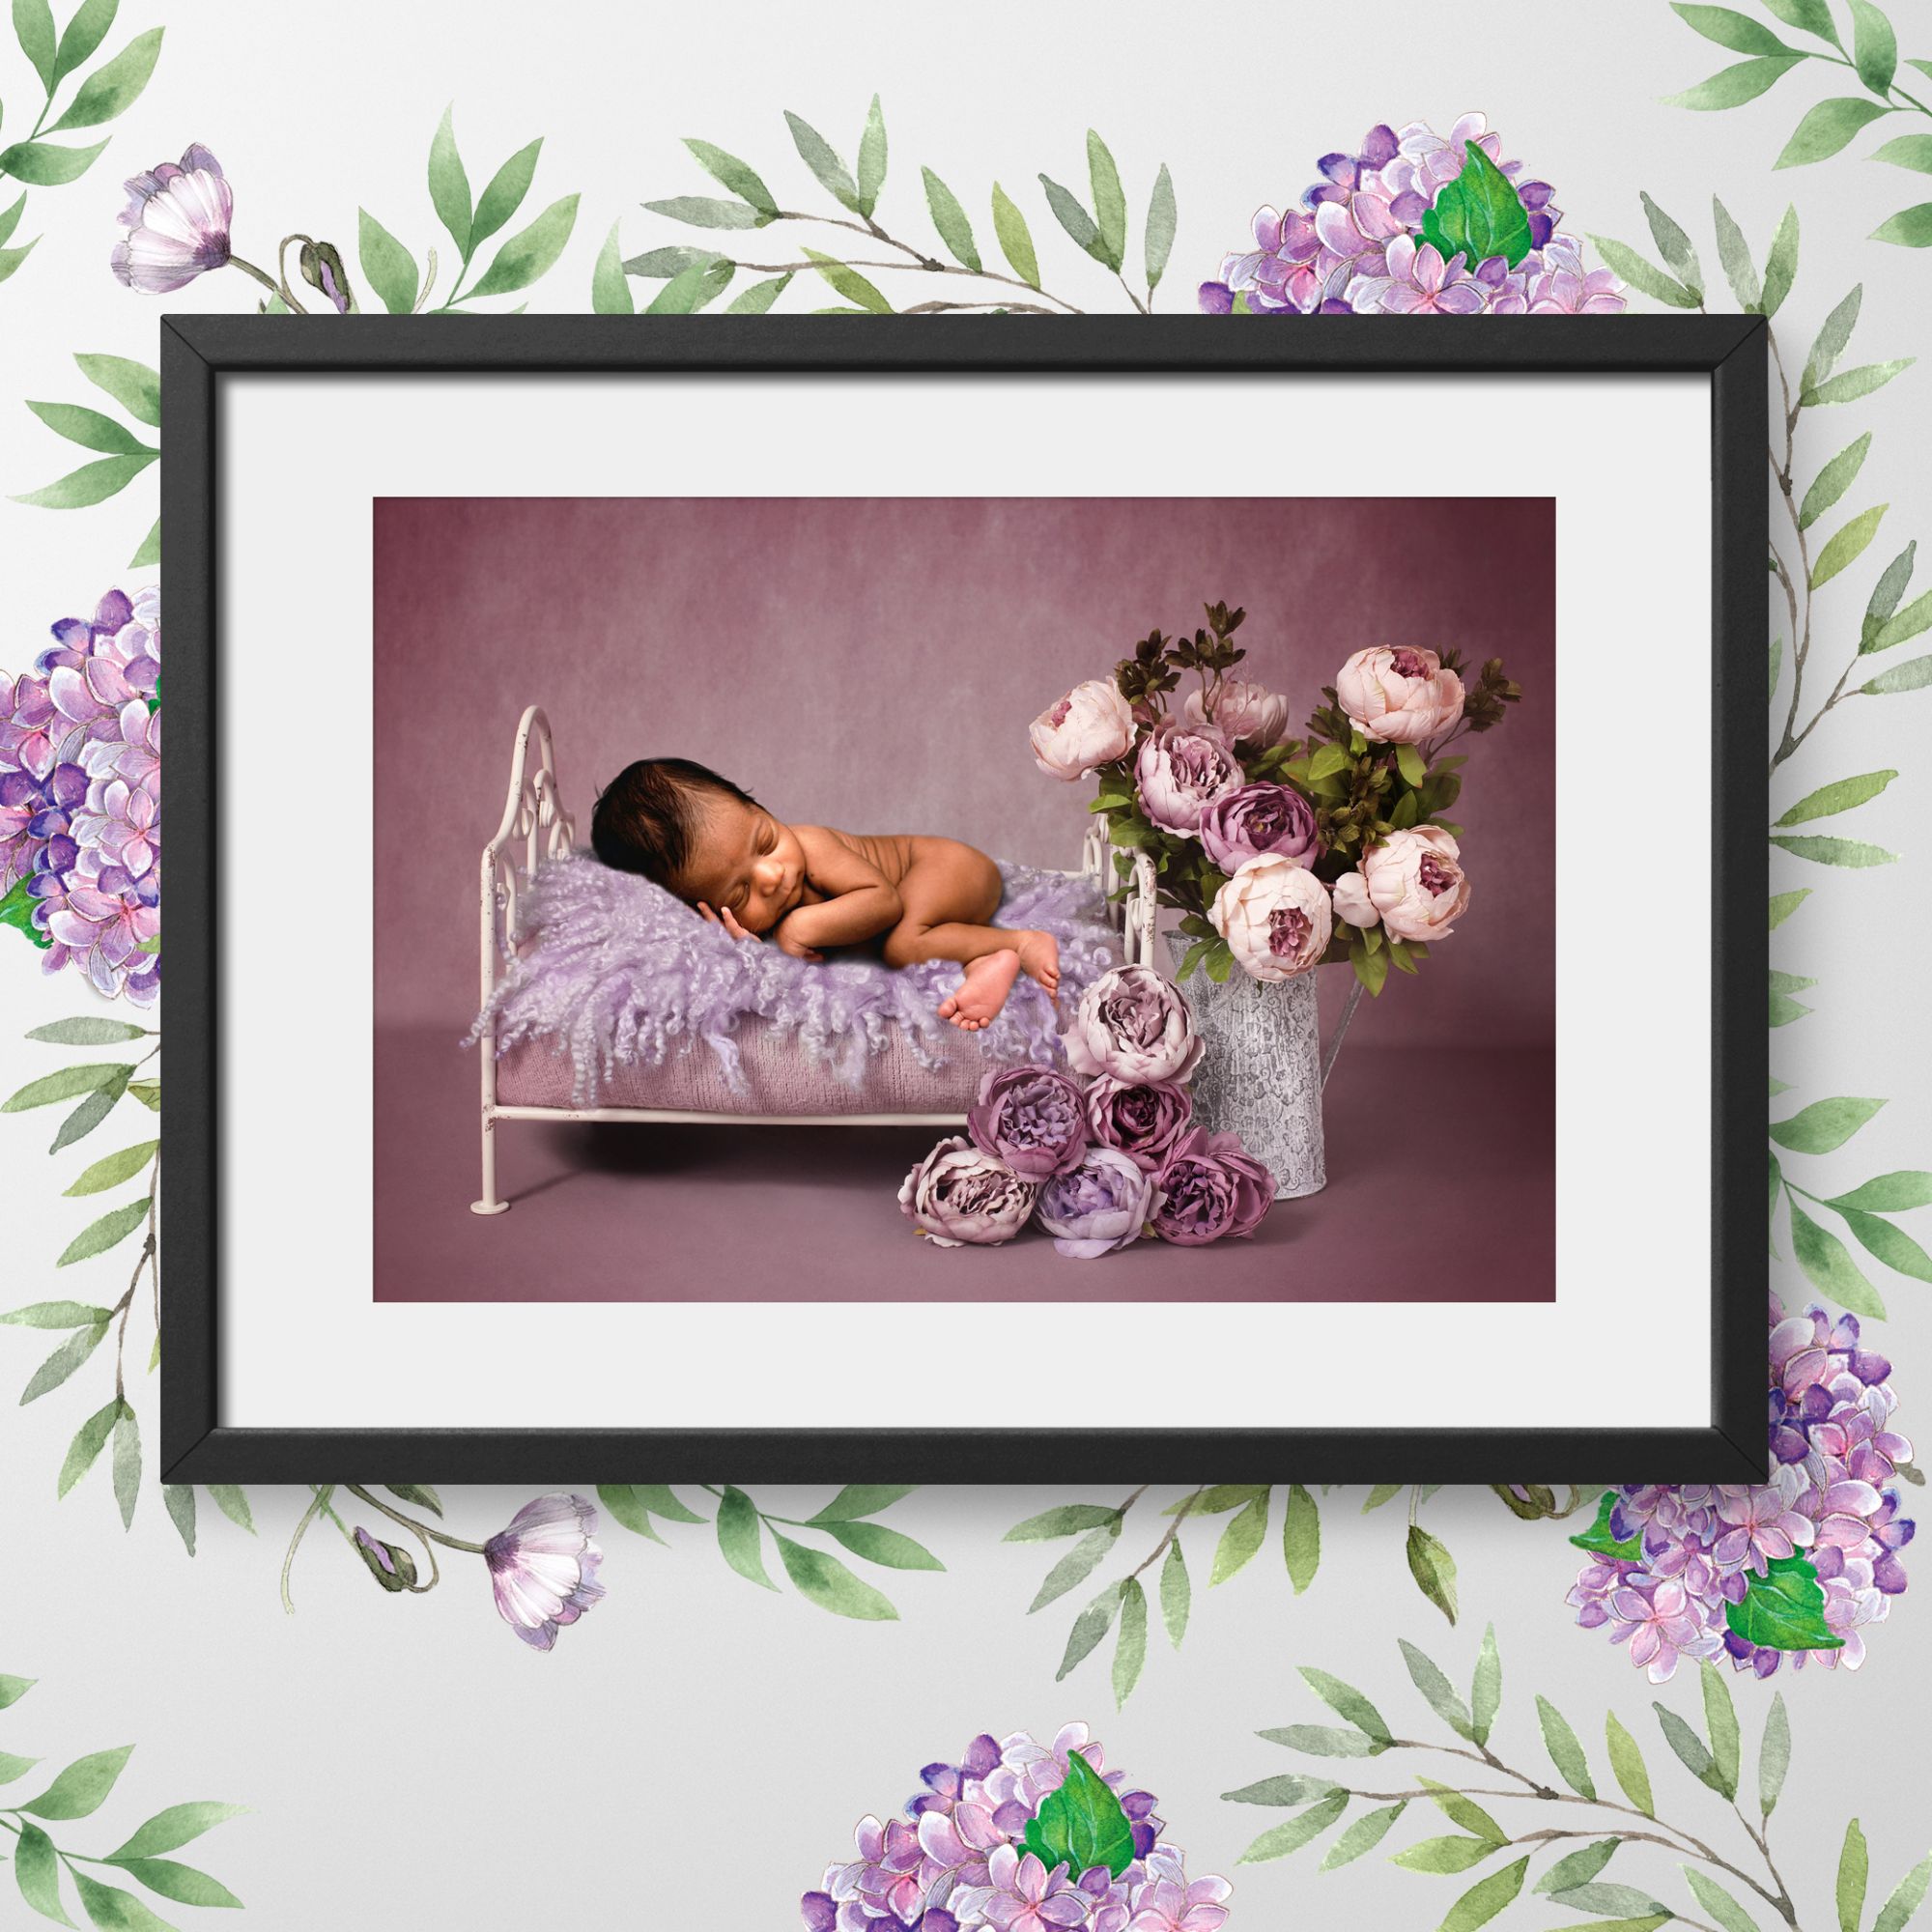 Sweetly Dreaming, bespoke fantasy image created from your own photo into unique personalised portrait and custom wall art | PhotoFairytales